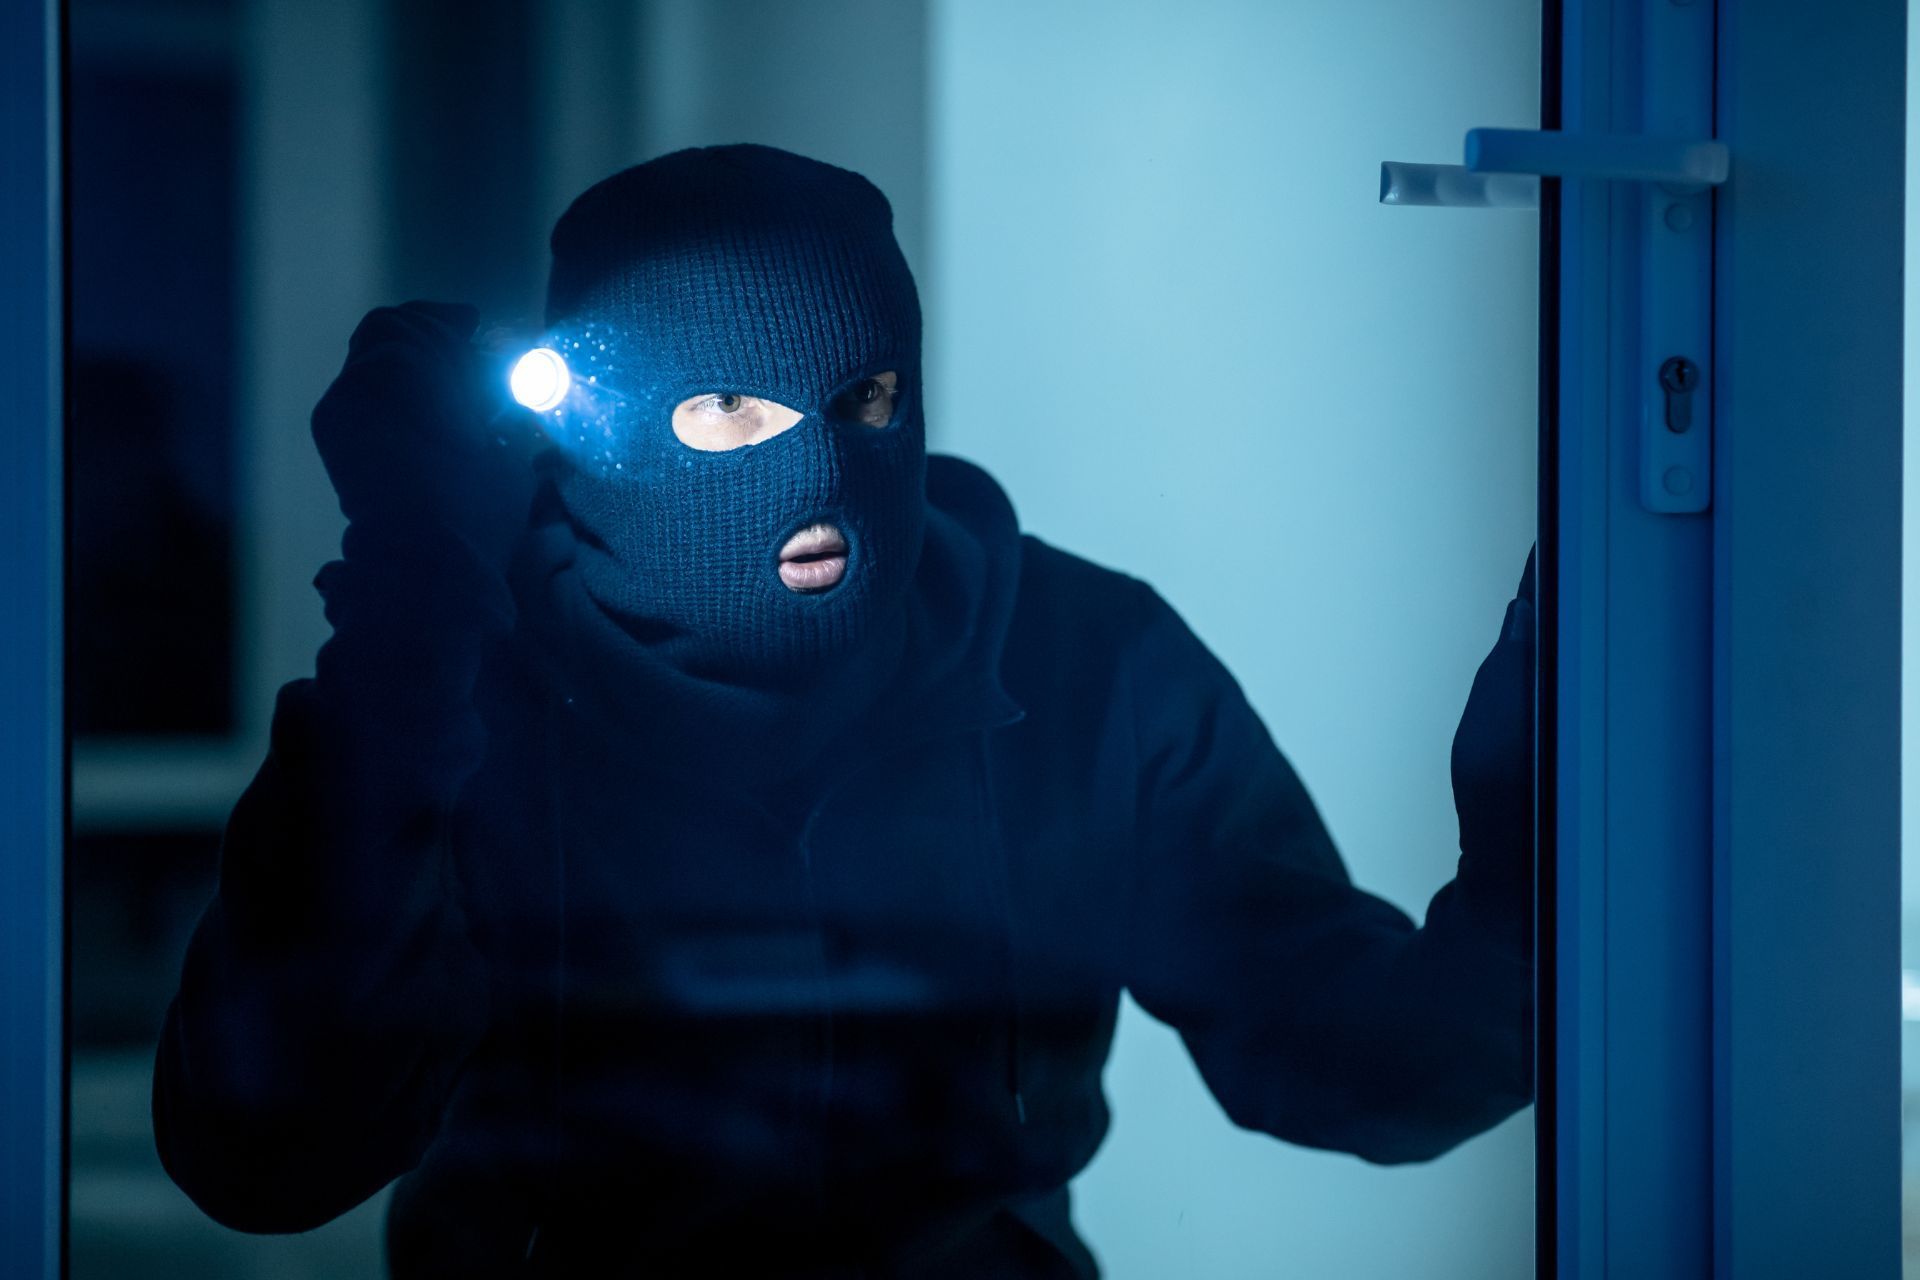 A burglar dressed in all-black clothes peers into the window at night while holding a flashlight
